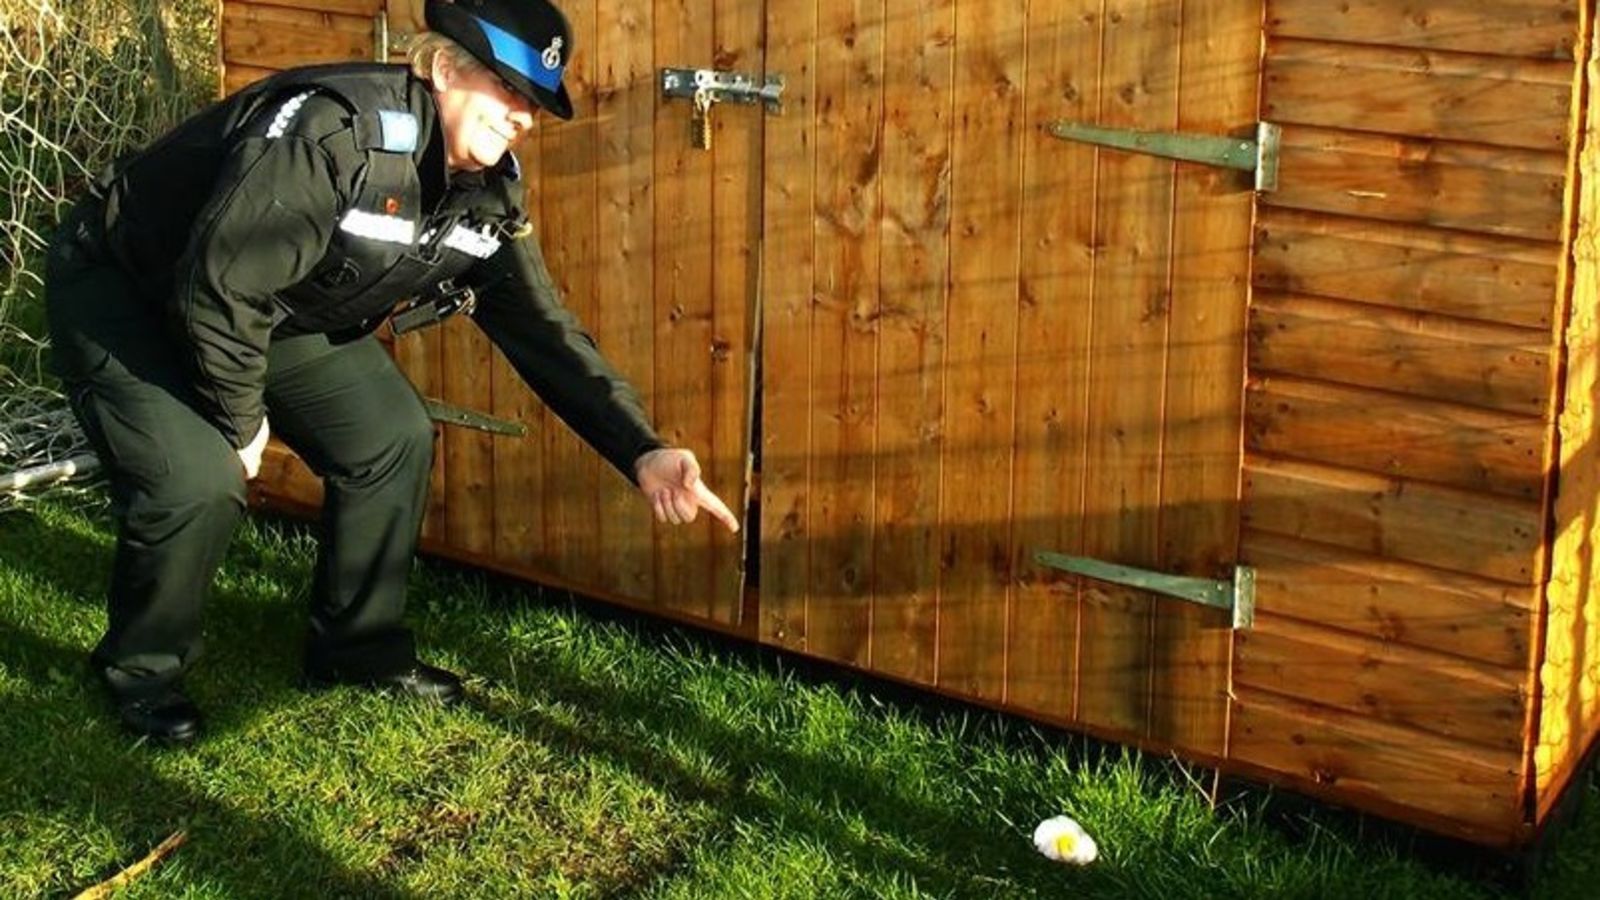 Police hope fried egg will solve shed break-in mystery | ITV News